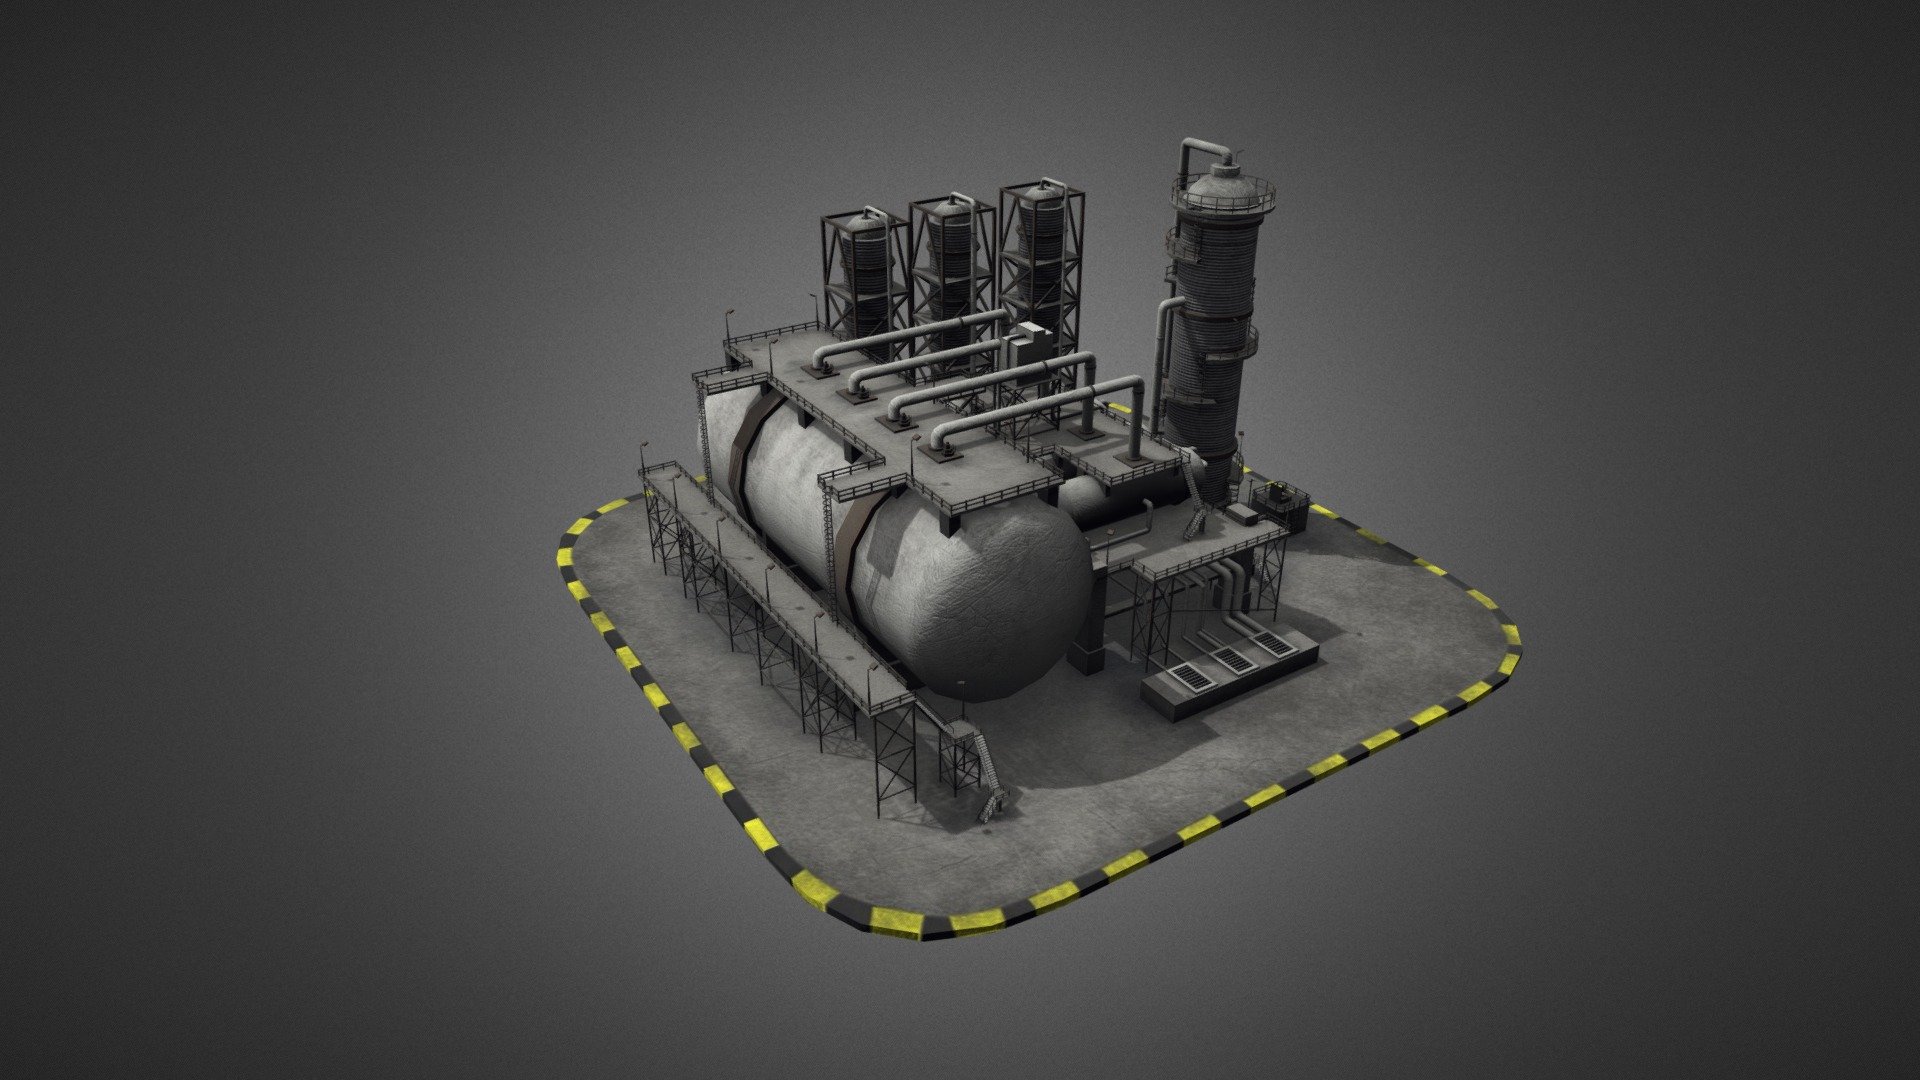 Low poly game-ready 3d model of an Oil Refinery 06 for Virtual Reality (VR), Augmented Reality (AR), games and other real-time apps 3d model